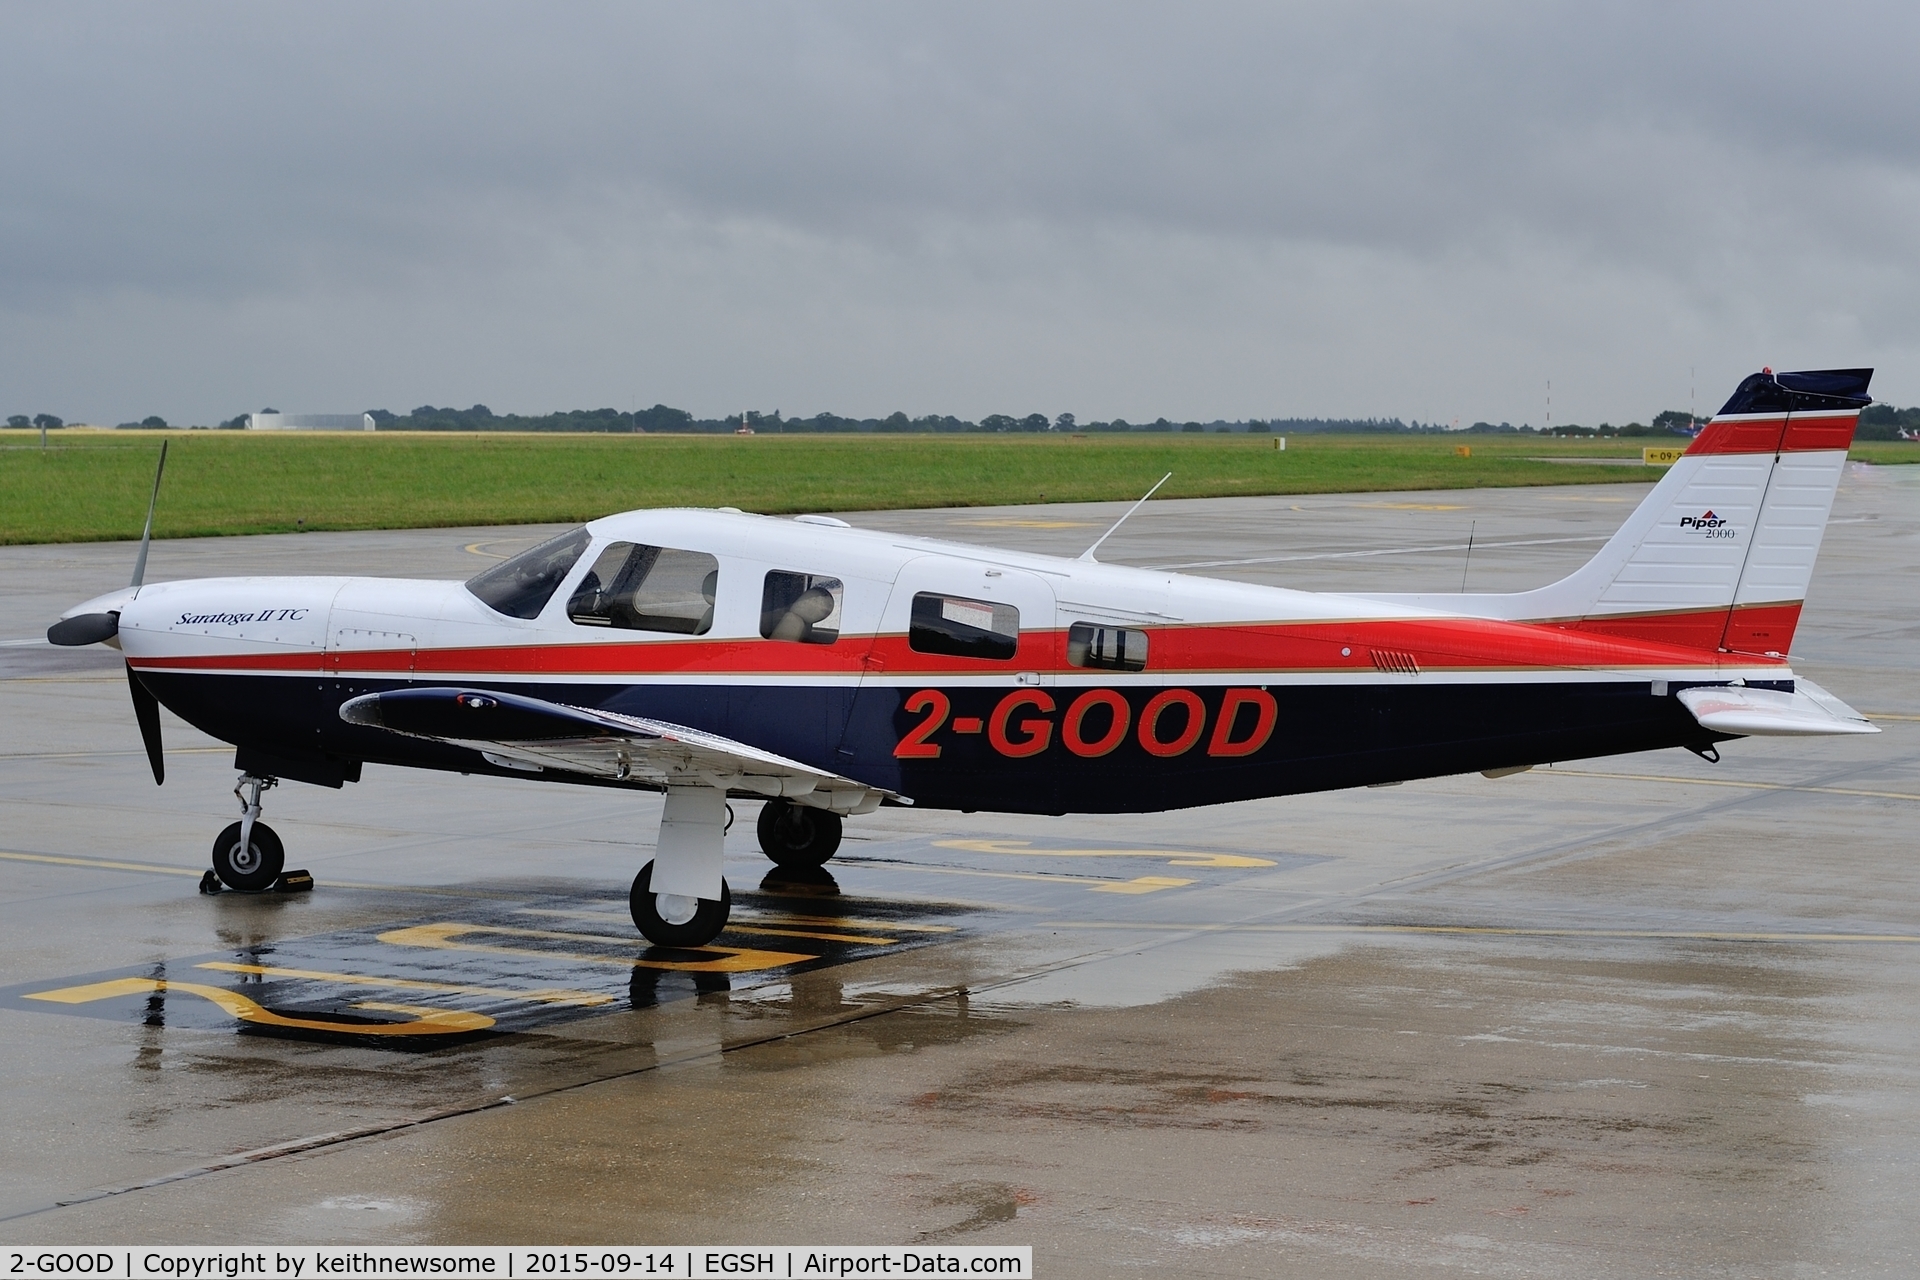 2-GOOD, 2000 Piper PA-32R-301T Turbo Saratoga C/N 3257178, Very nice visitor.